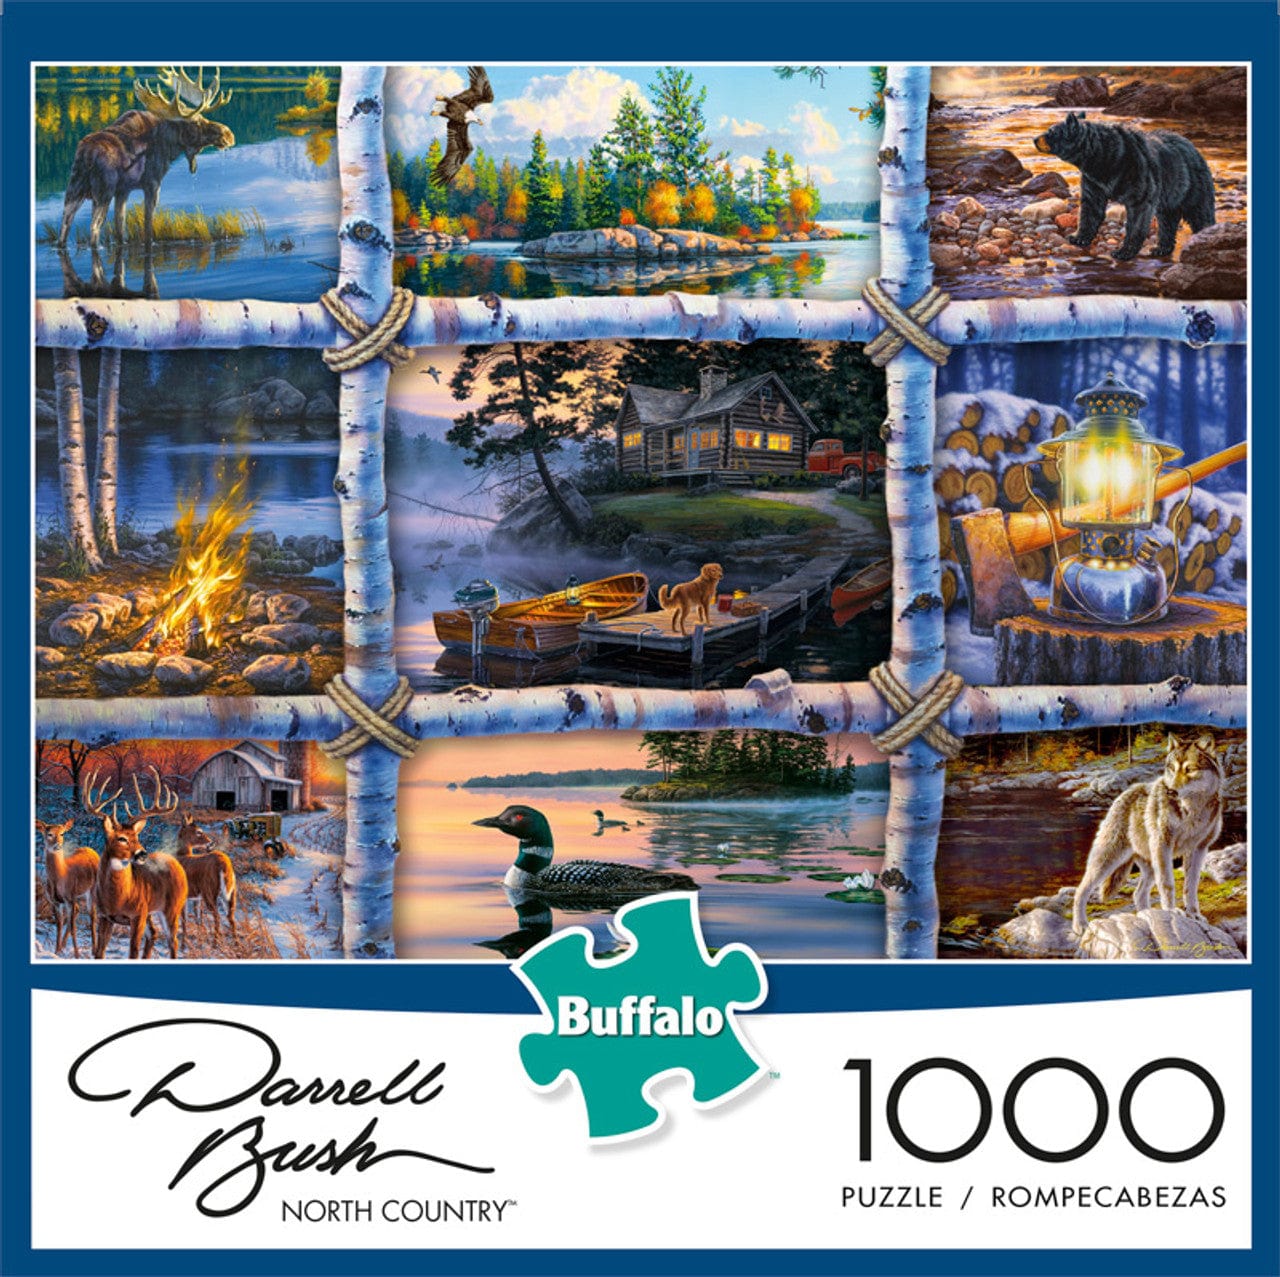 JIGSAW PUZZLE - North Country - By Darrell Bush - 1000 PCS